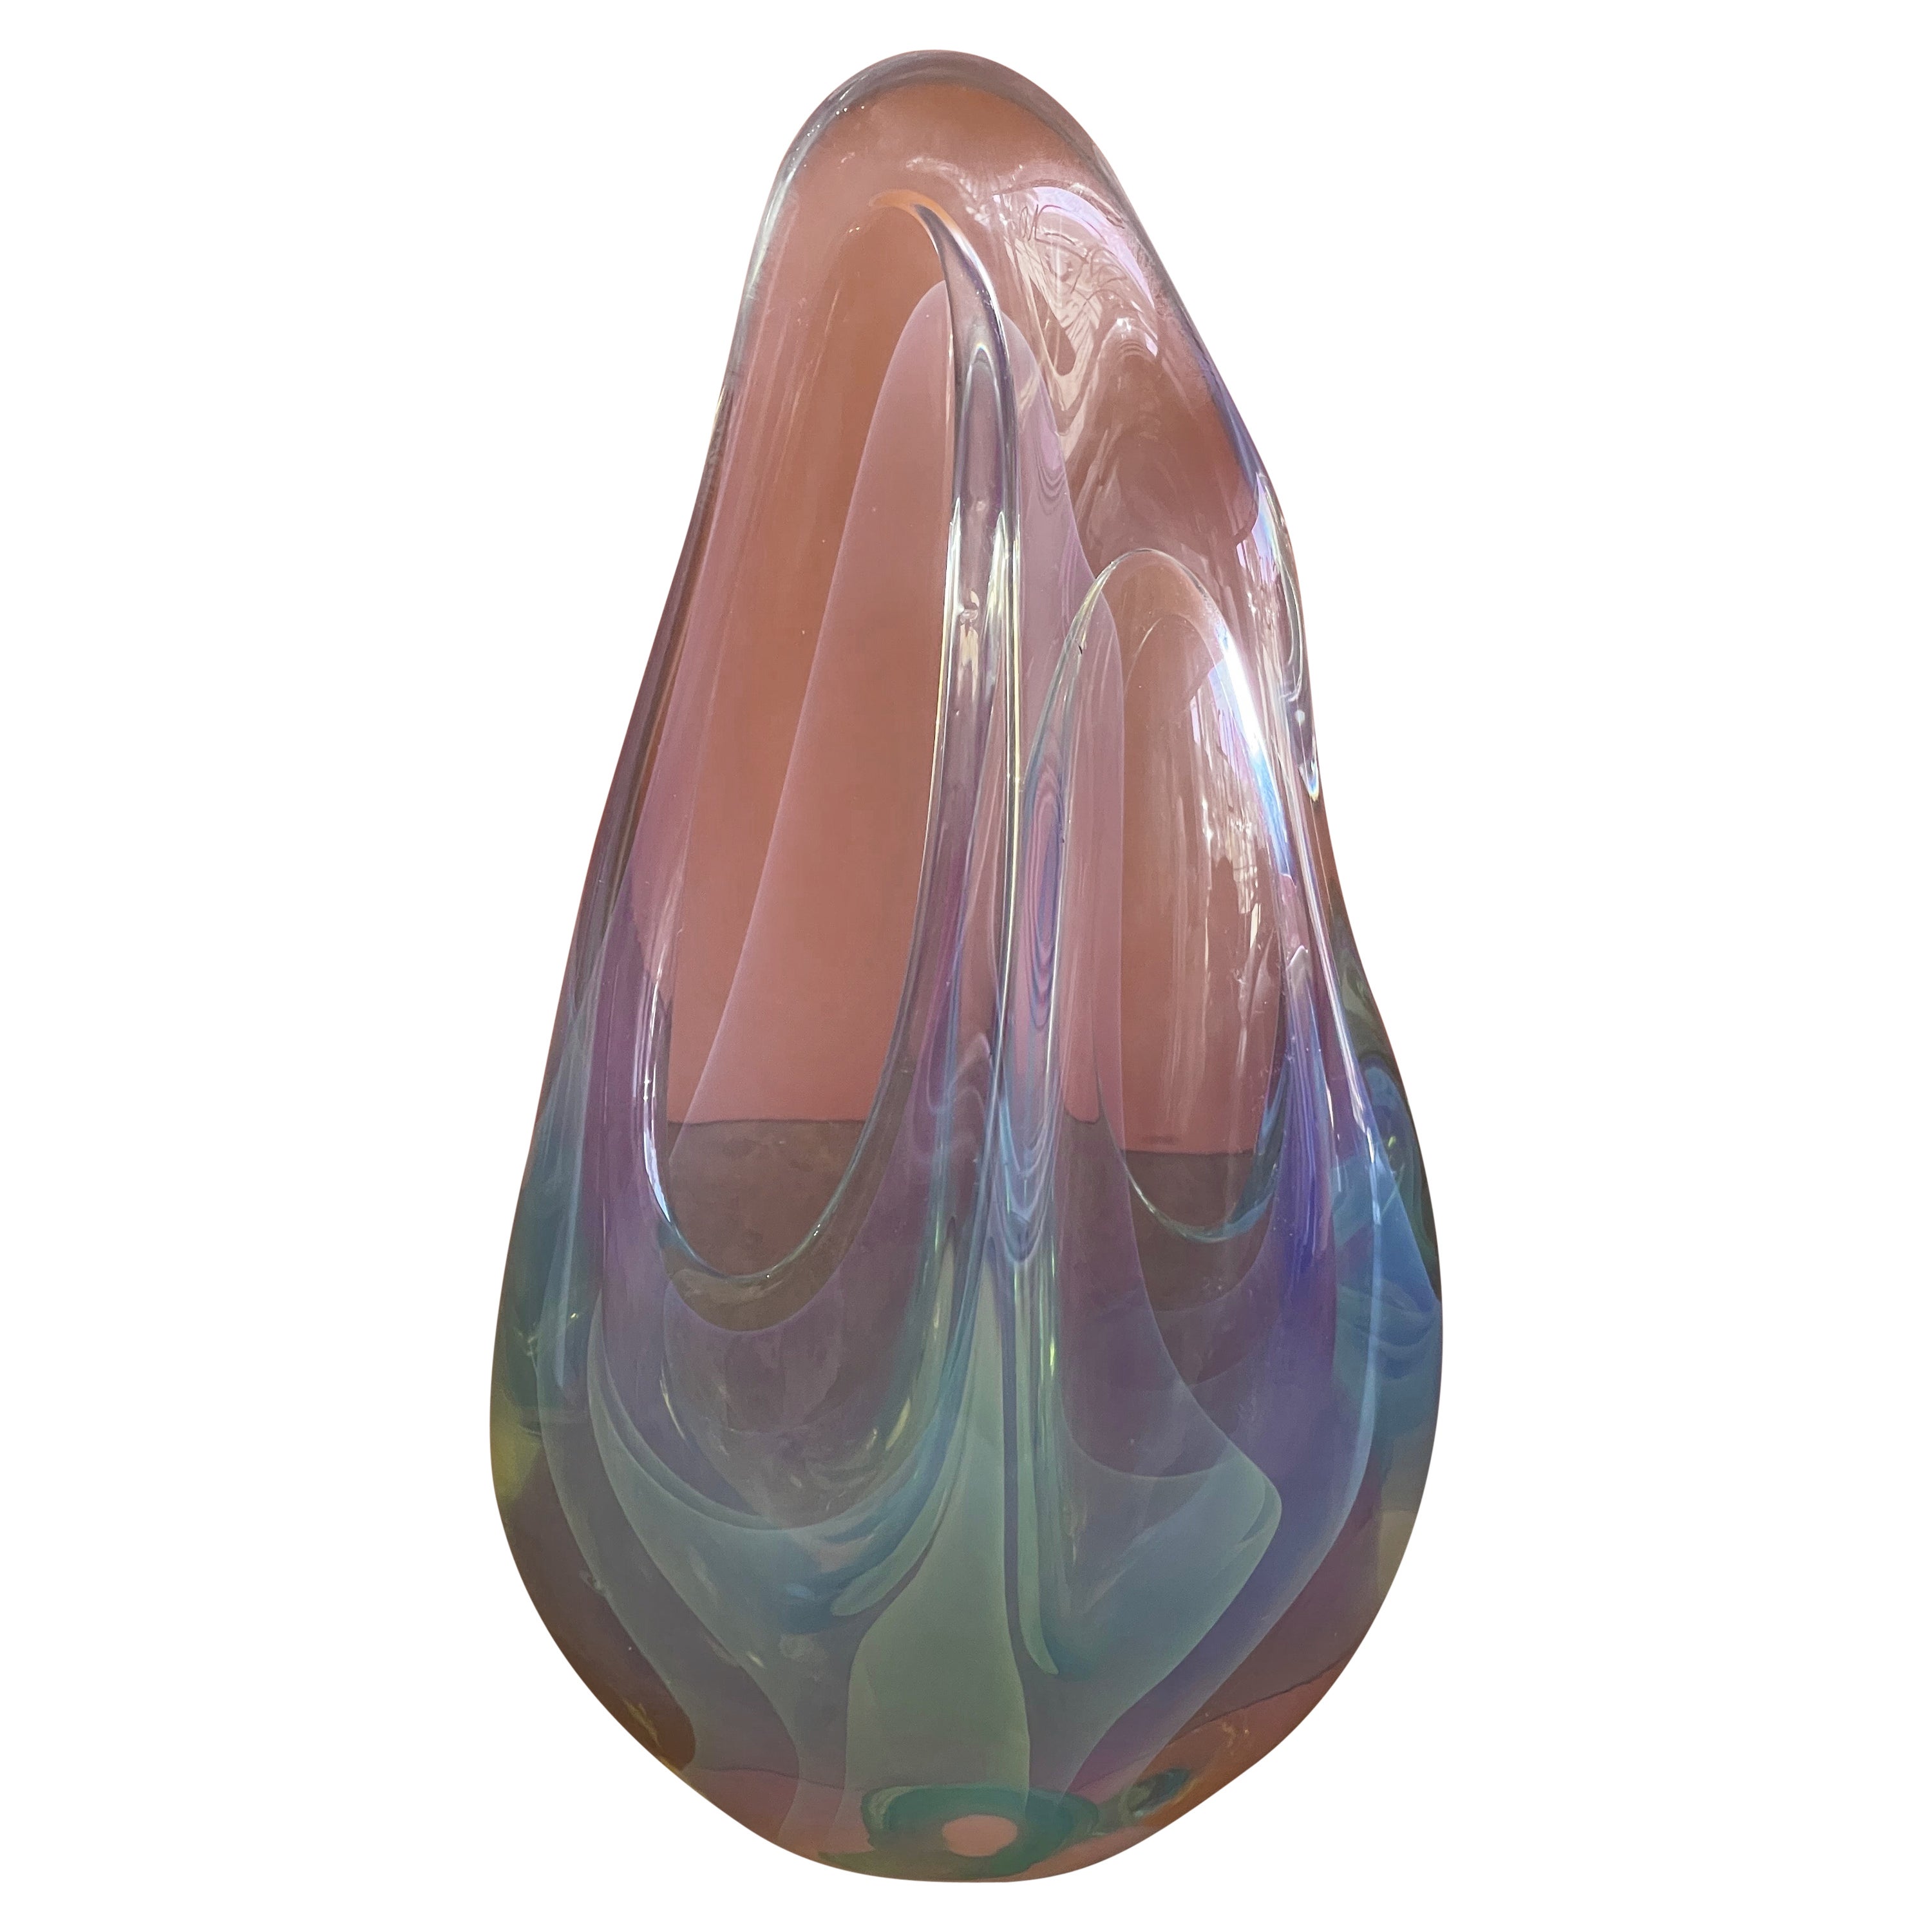 Opalescence Tear Drop Art Glass Sculpture by Charles Wright